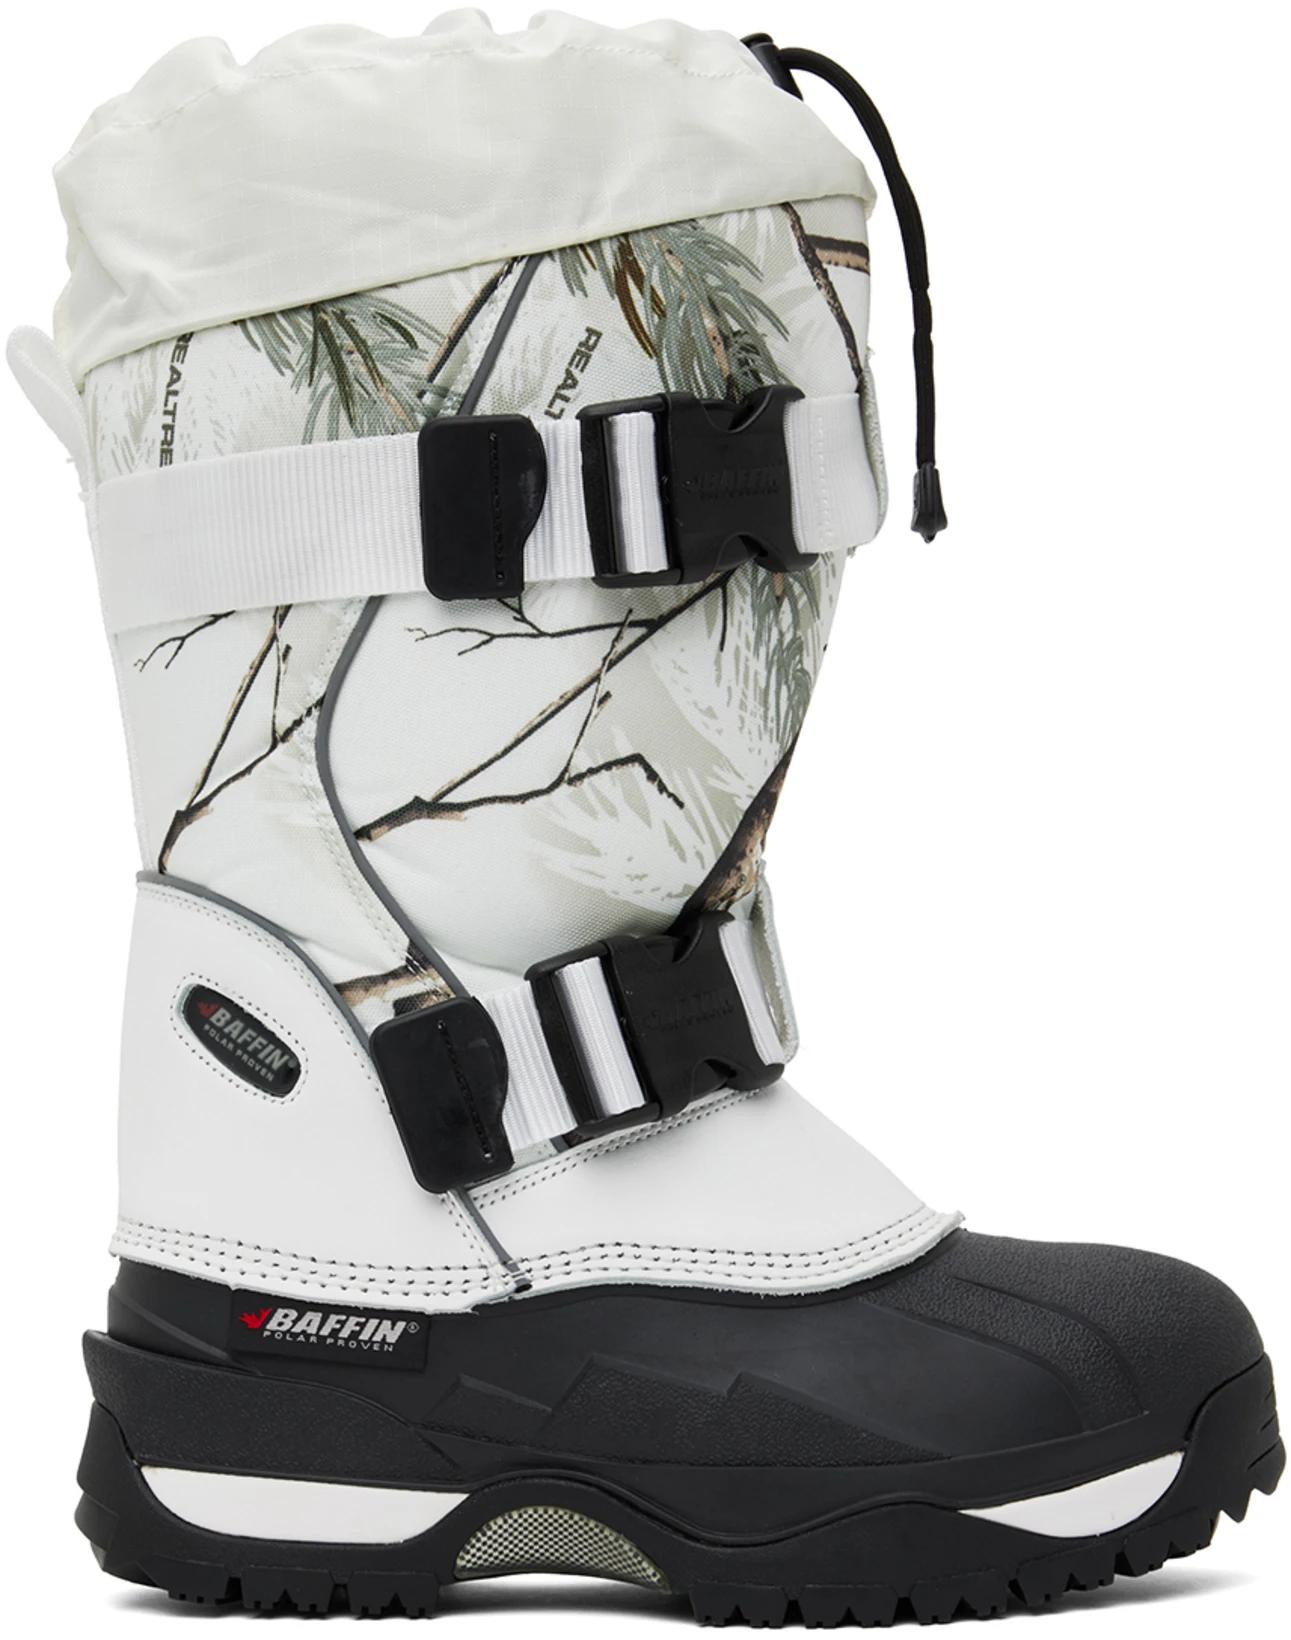 Off-White Impact Boots by BAFFIN